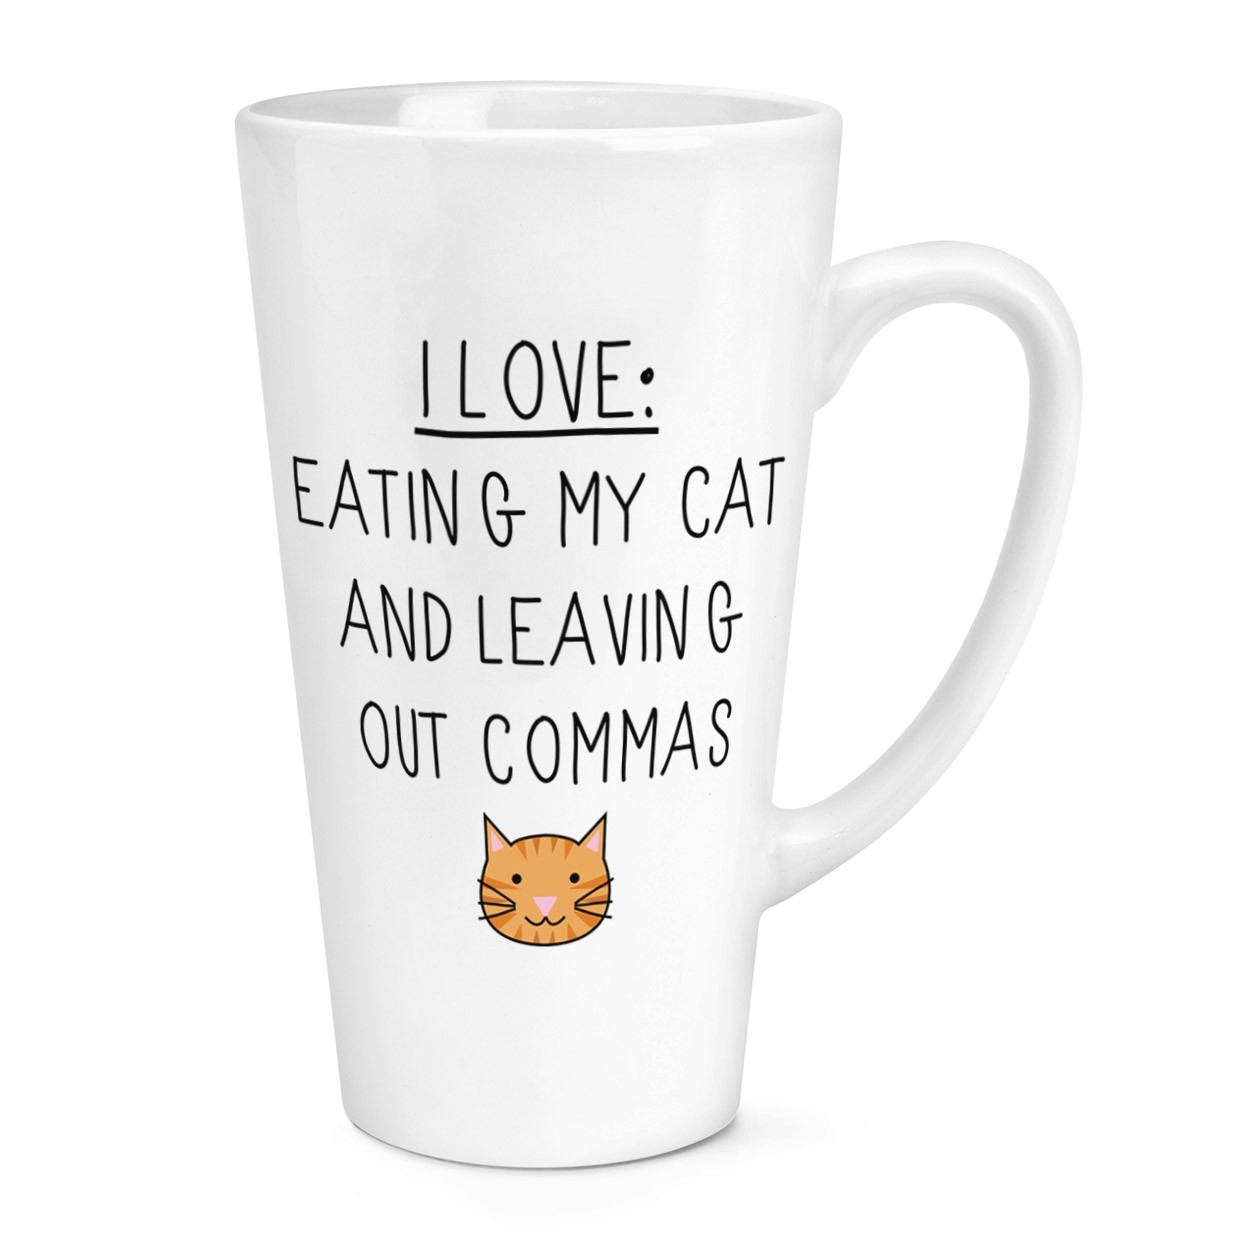 I Love Eating My Cat and Leaving Out Commas 17oz Large Latte Mug Cup